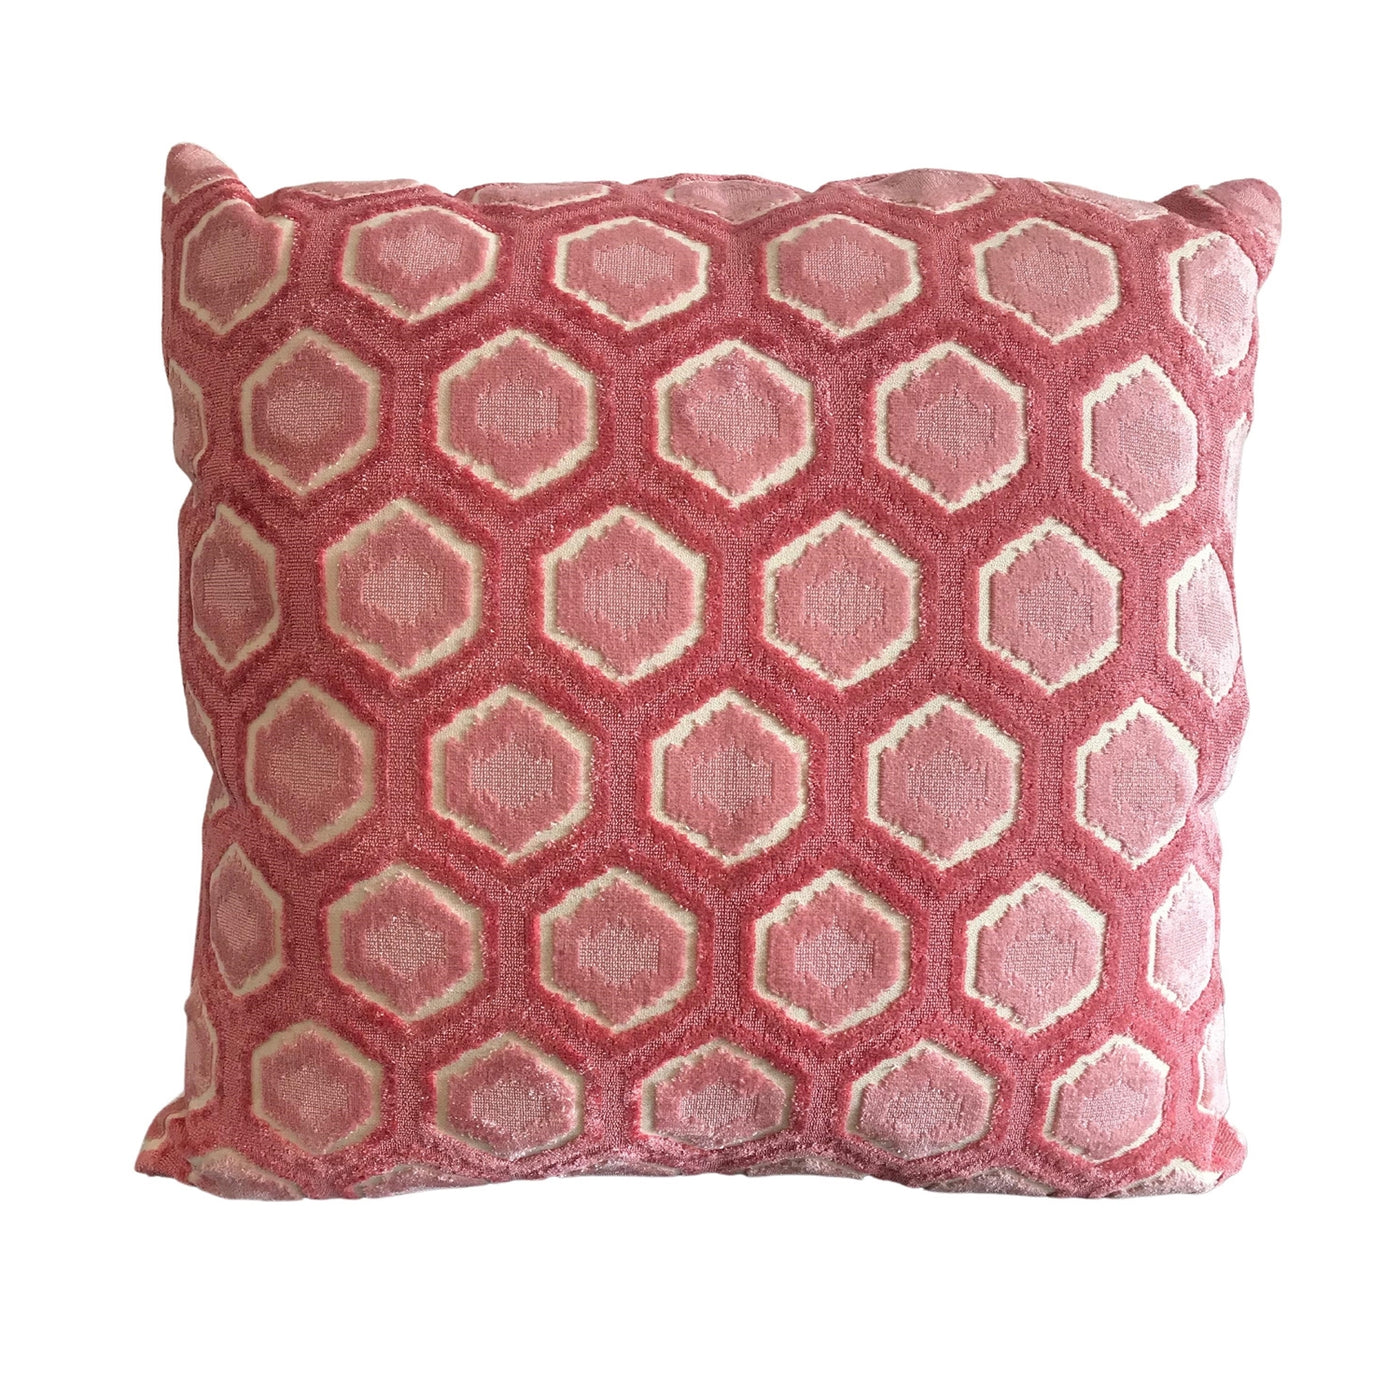 Rose Colored Flocked  Geometric Pillow - 22"